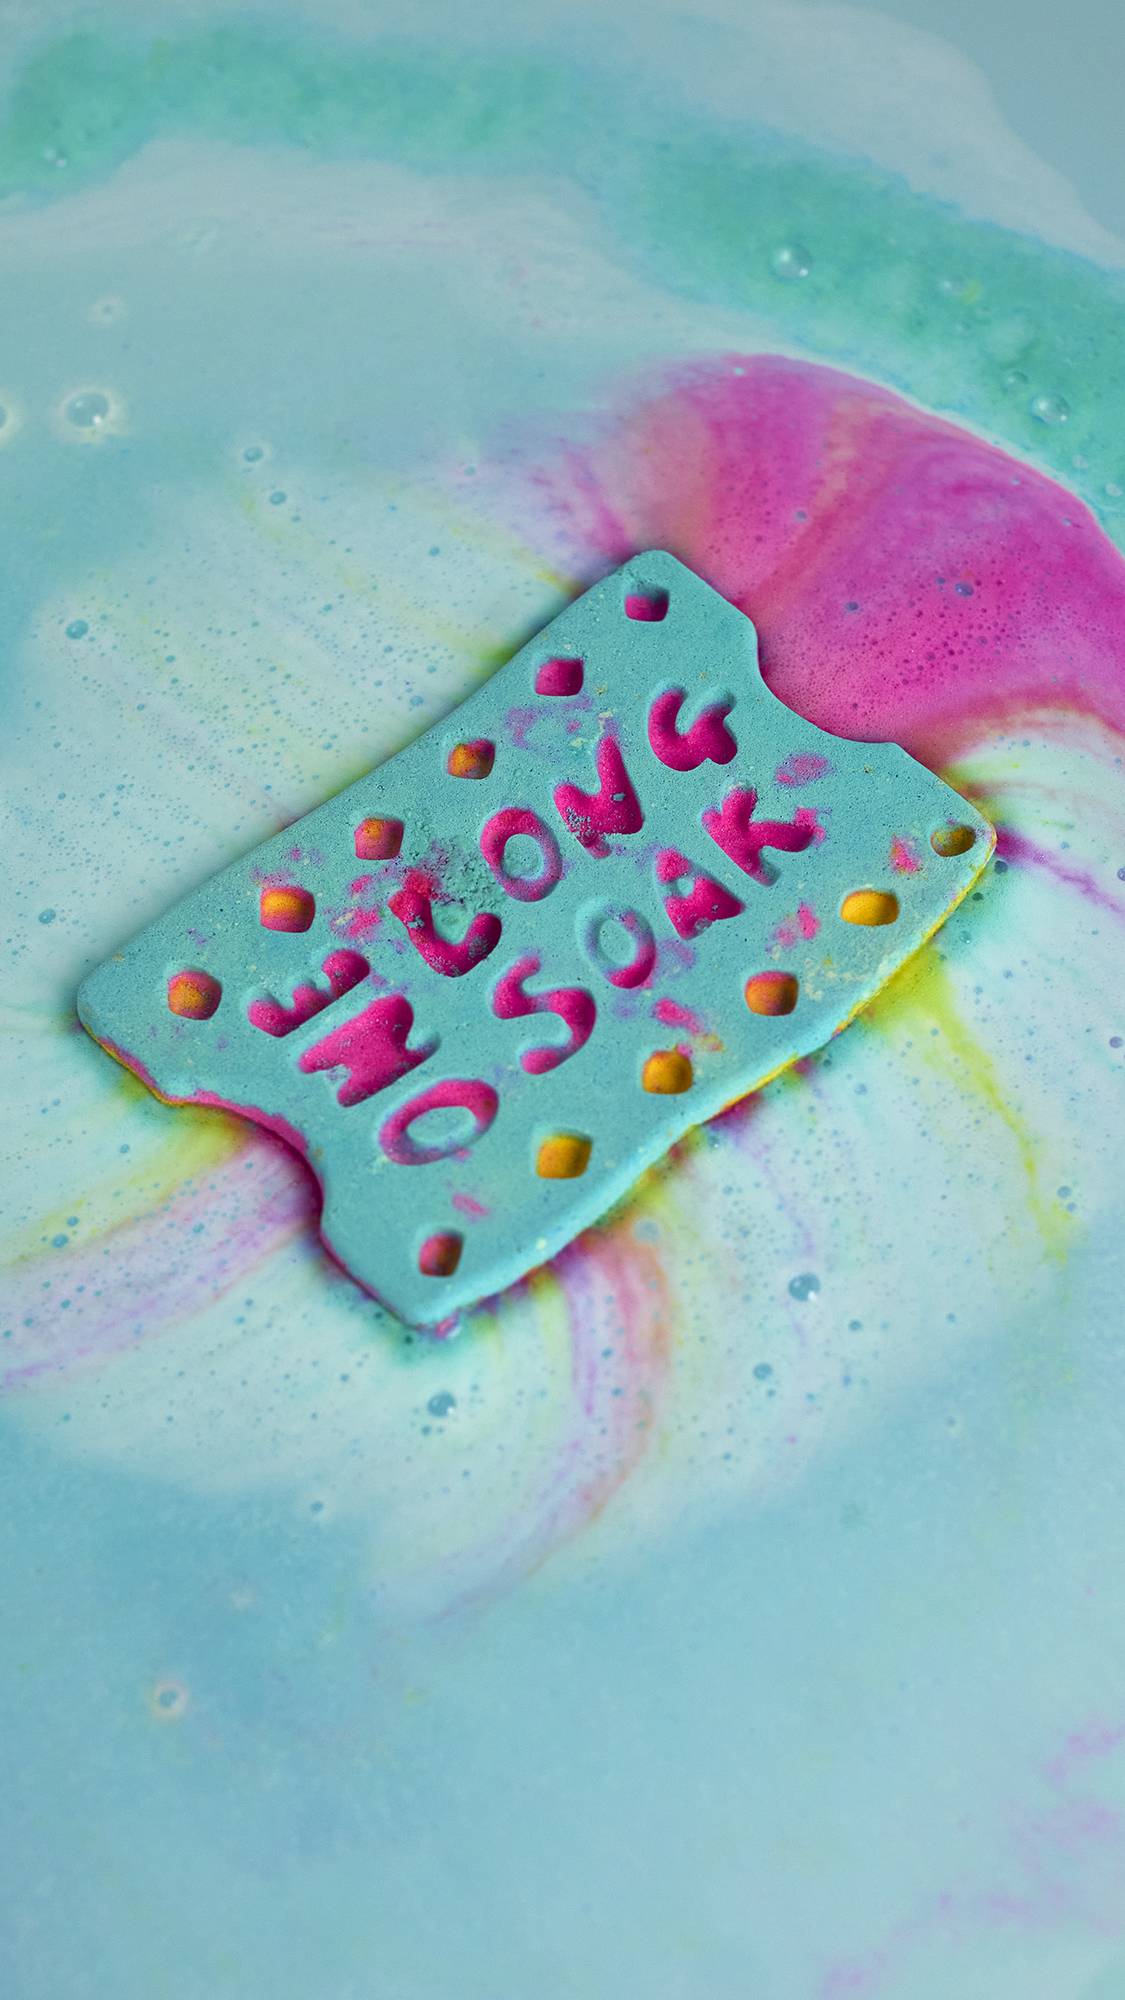 The One Long Soak bath bomb is slowly dissolving in the water giving swirls of blue, pink, and yellow.